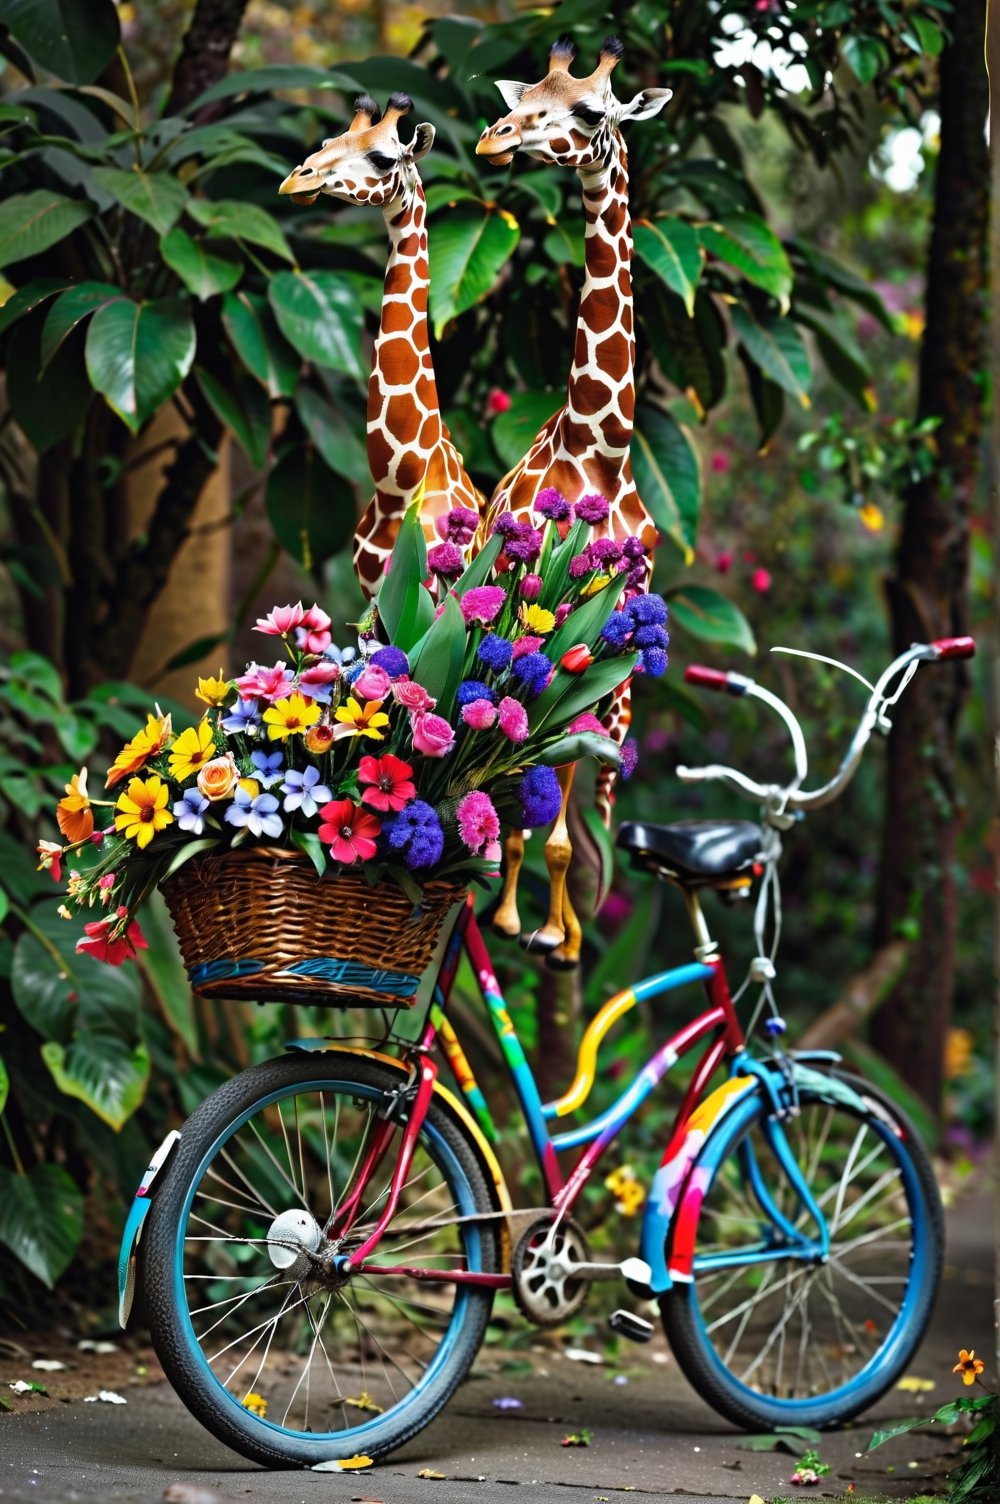 araffe with a basket of flowers on a bicycle, carrying flowers, full of flowers, flowers!!!!, beautiful flowers, colourful, full of colors, made of flowers, very colourful, full of color, full of colour, !!natural beauty!!, very beautiful photo, covered with flowers, beautiful colorful, full of colours, wow it is beautiful, beautiful and colorful